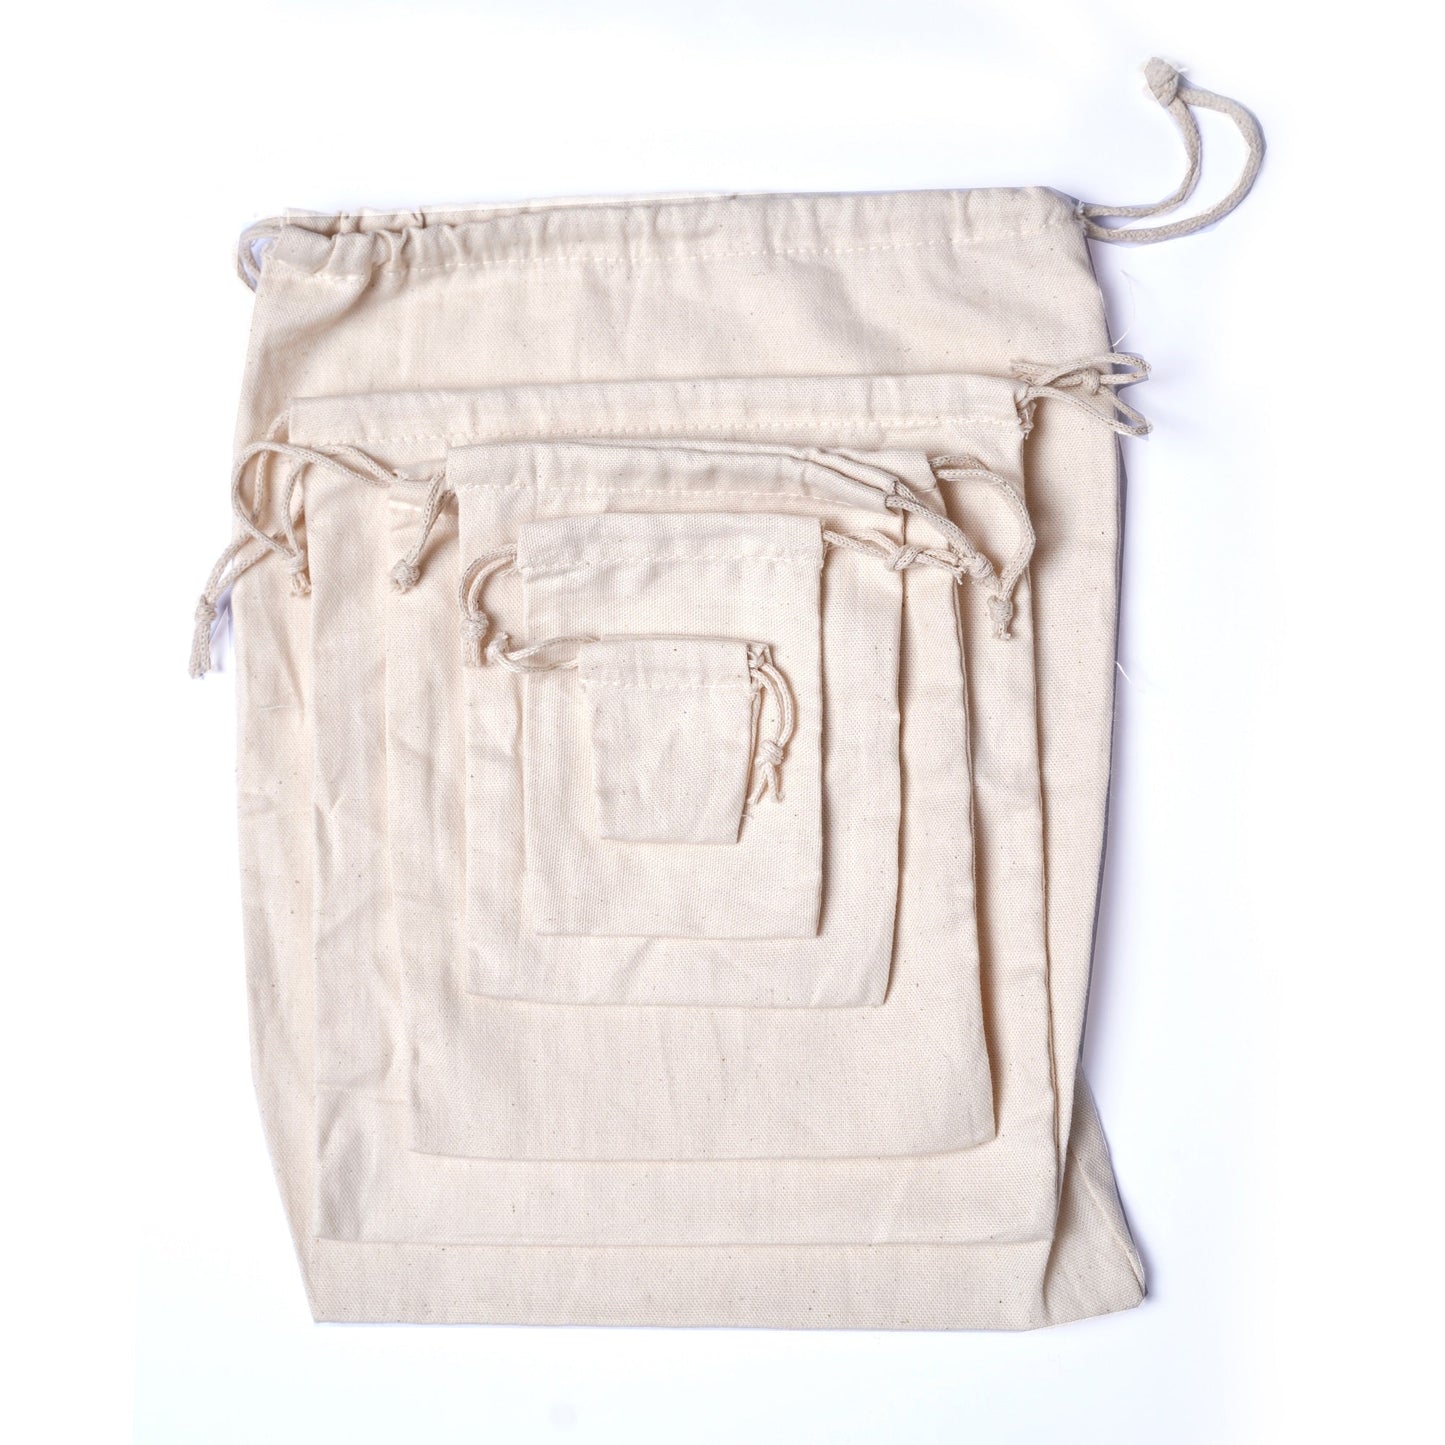 8x10 Inches Reusable Eco-Friendly Double Drawstring Cotton CANVAS Bags Natural Color